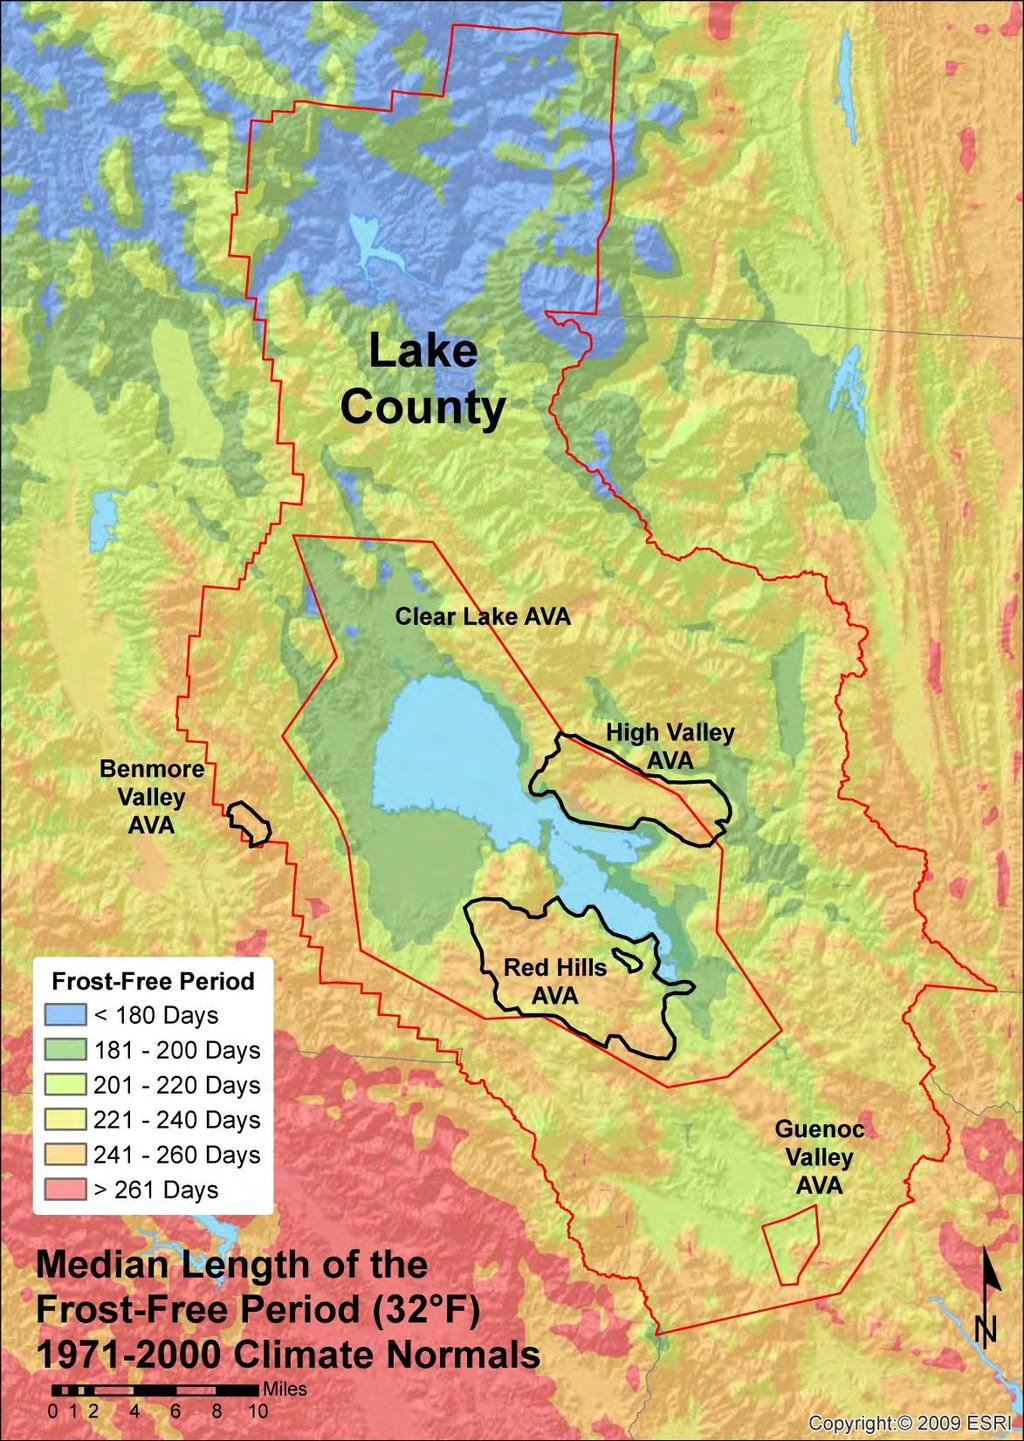 Frost Free Period (days) AVA Name Median Max Min Range Clear Lake 200 260 174 86 Guenoc Valley 216